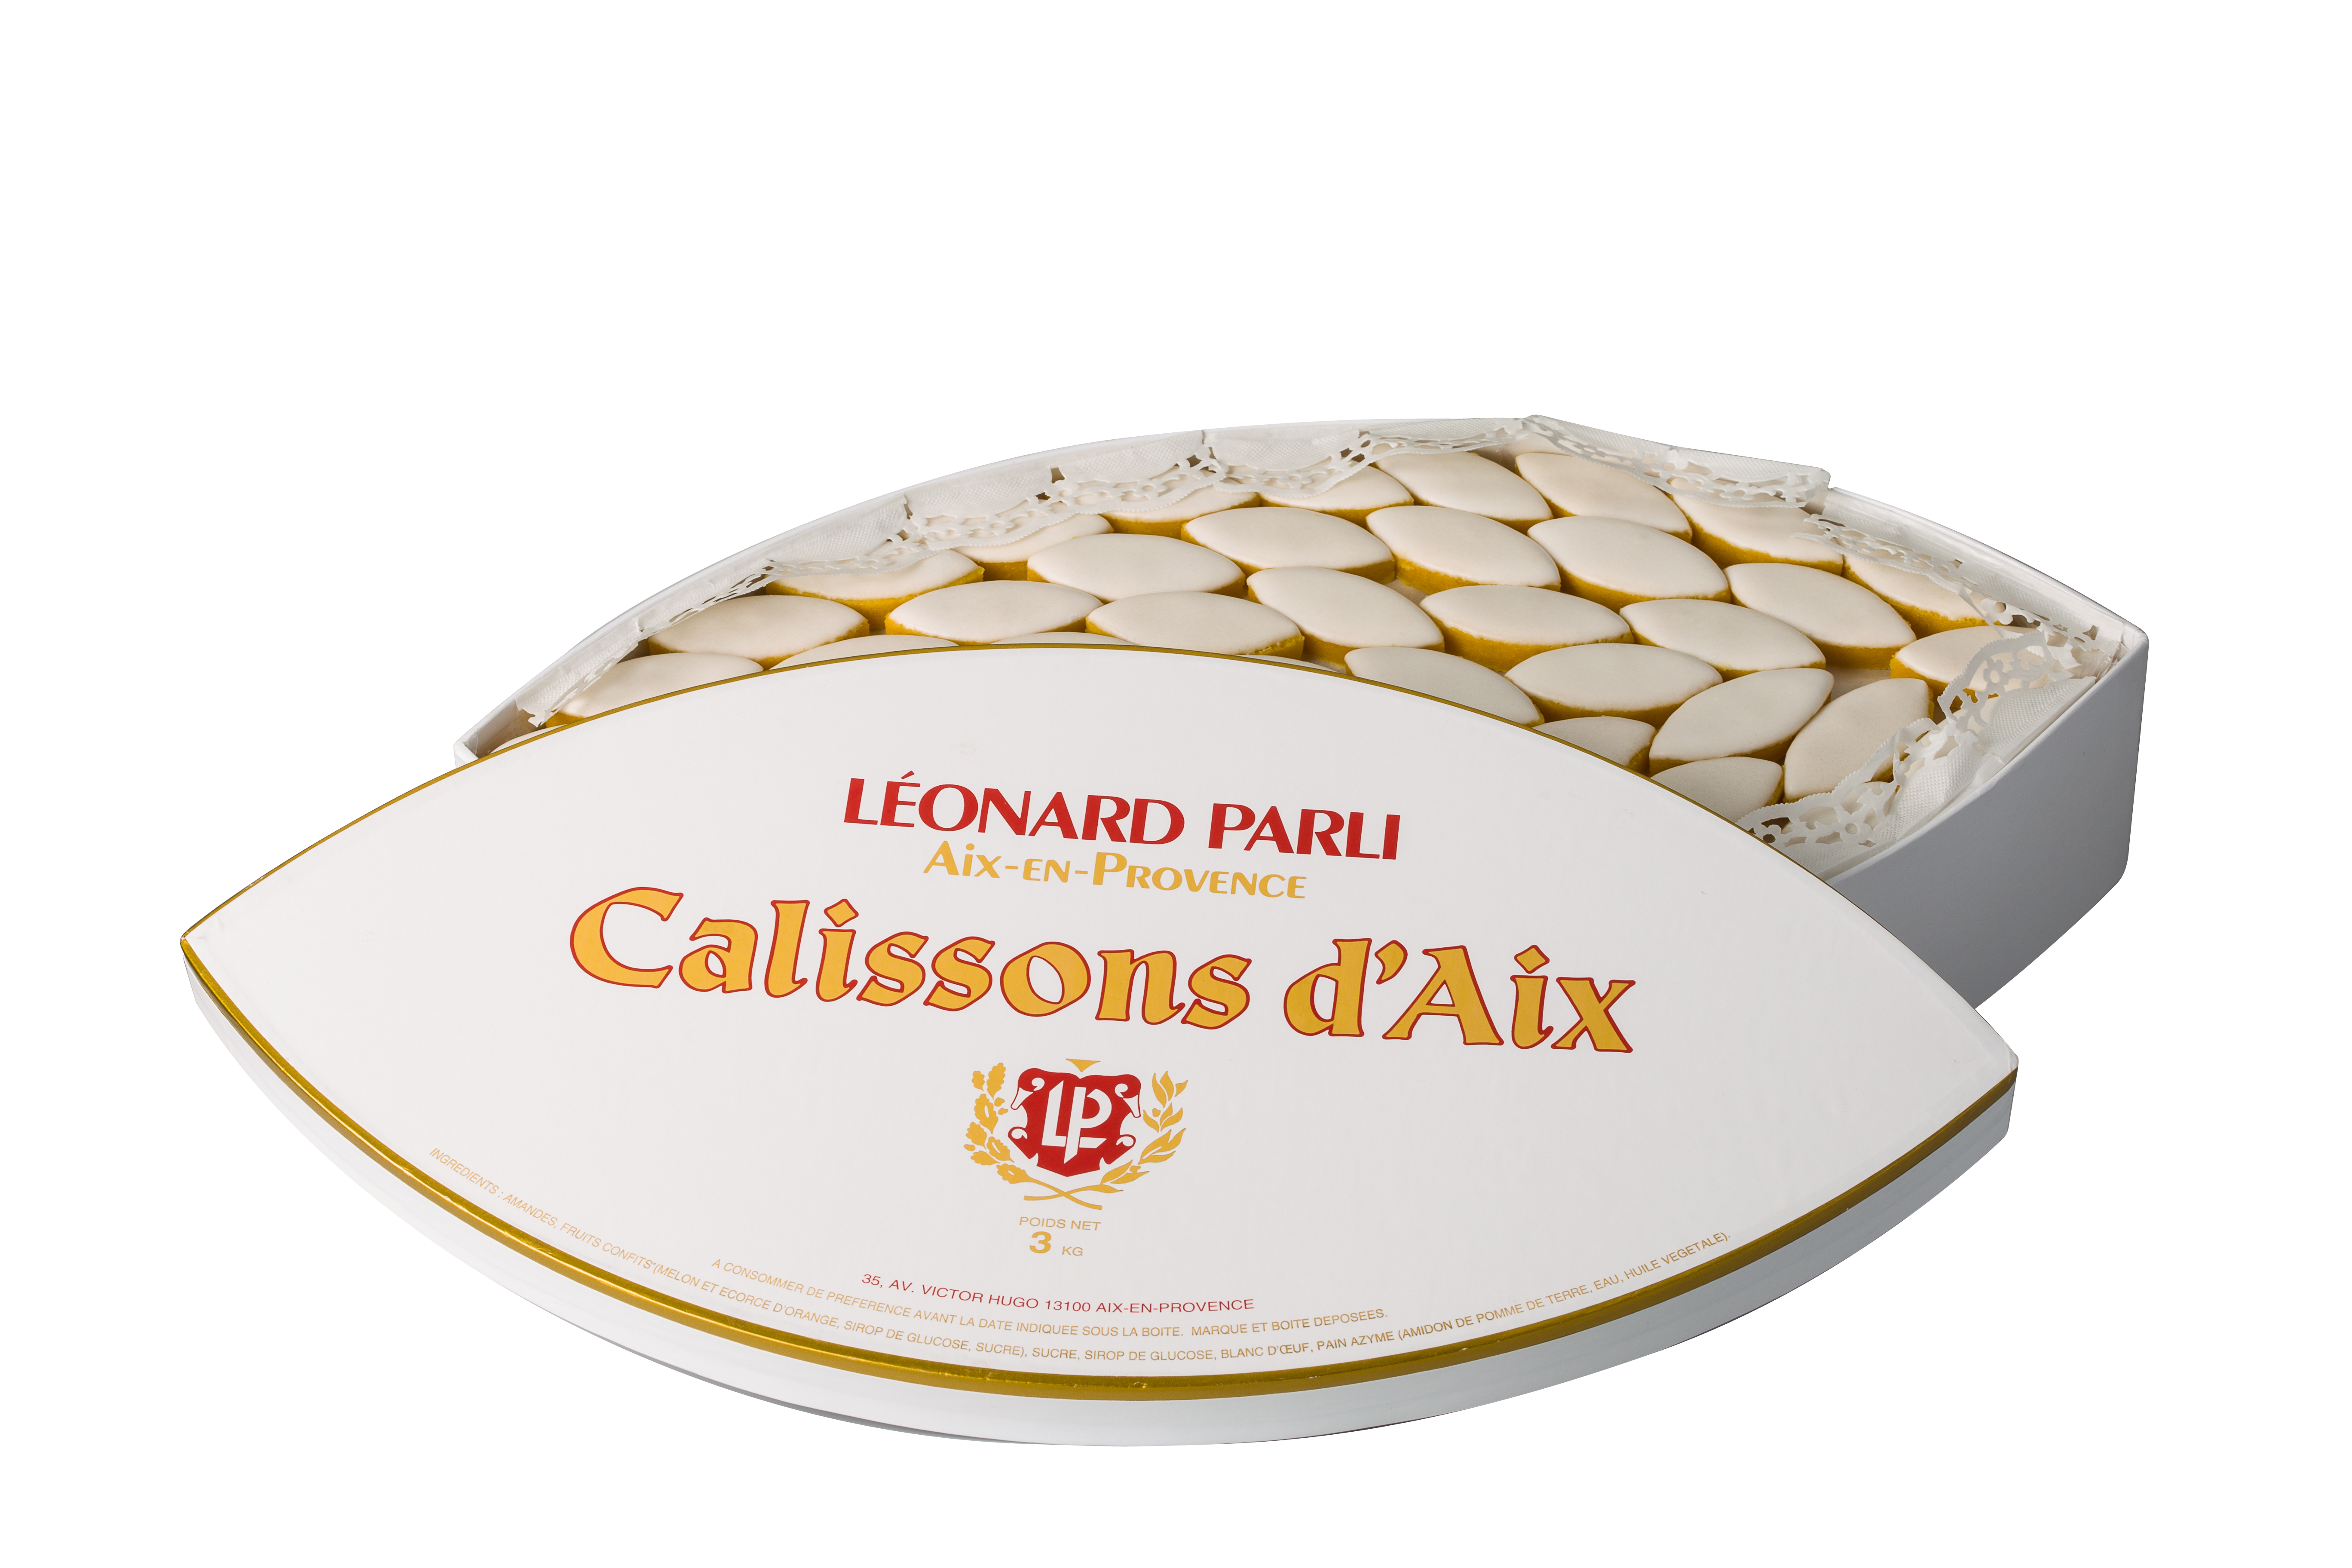 Calissons d'Aix-en-Provence: the famous sweet from Provence.